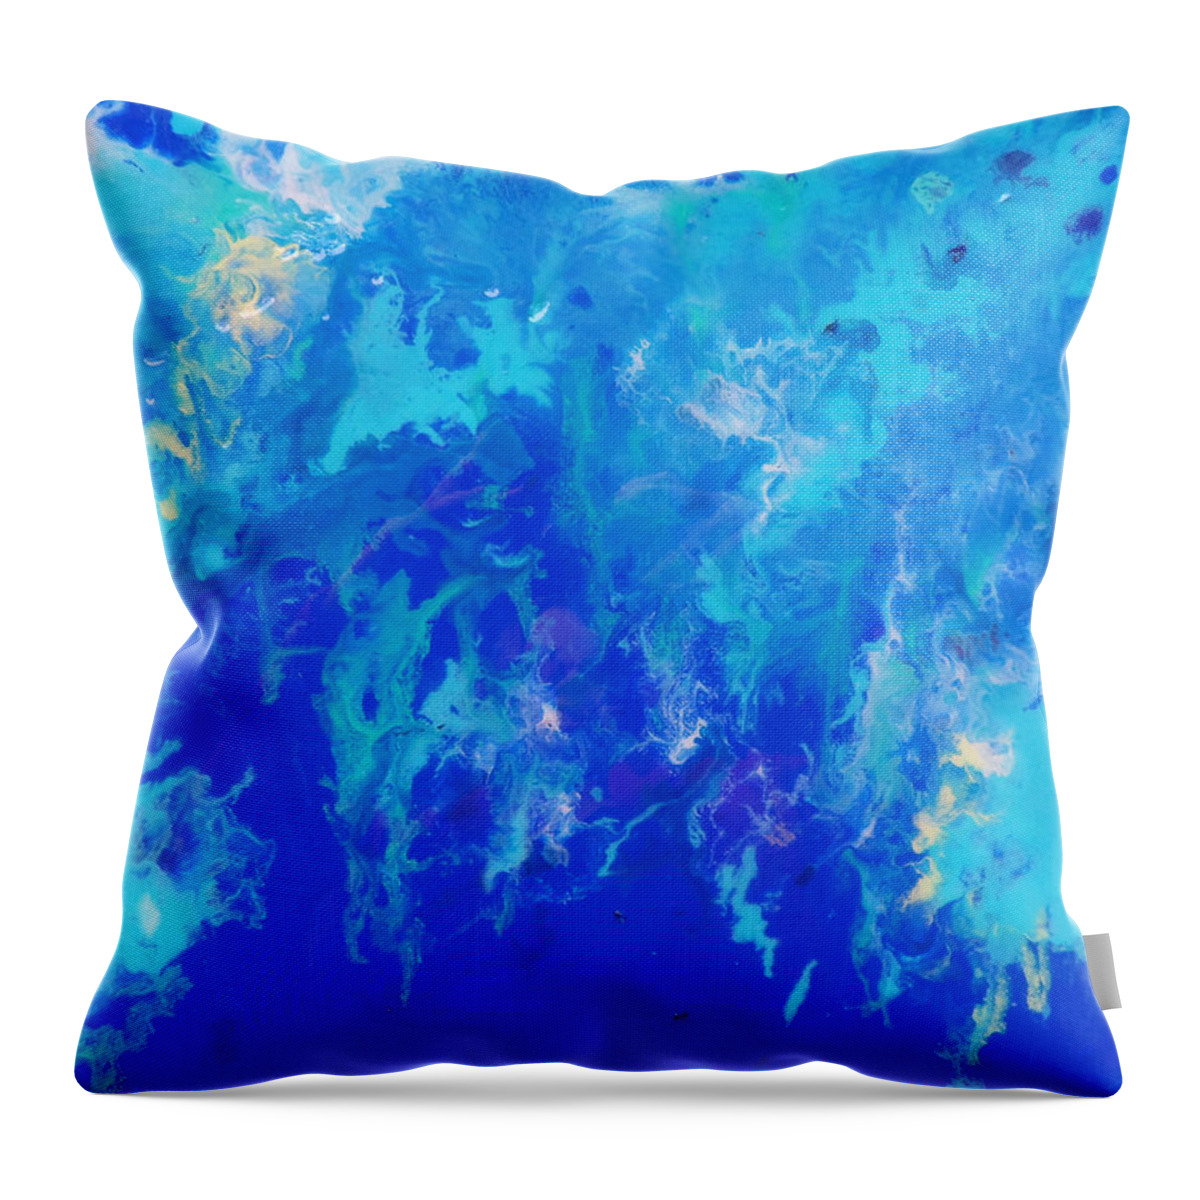 Abstract Art Throw Pillow featuring the painting Easy I by Jane Biven